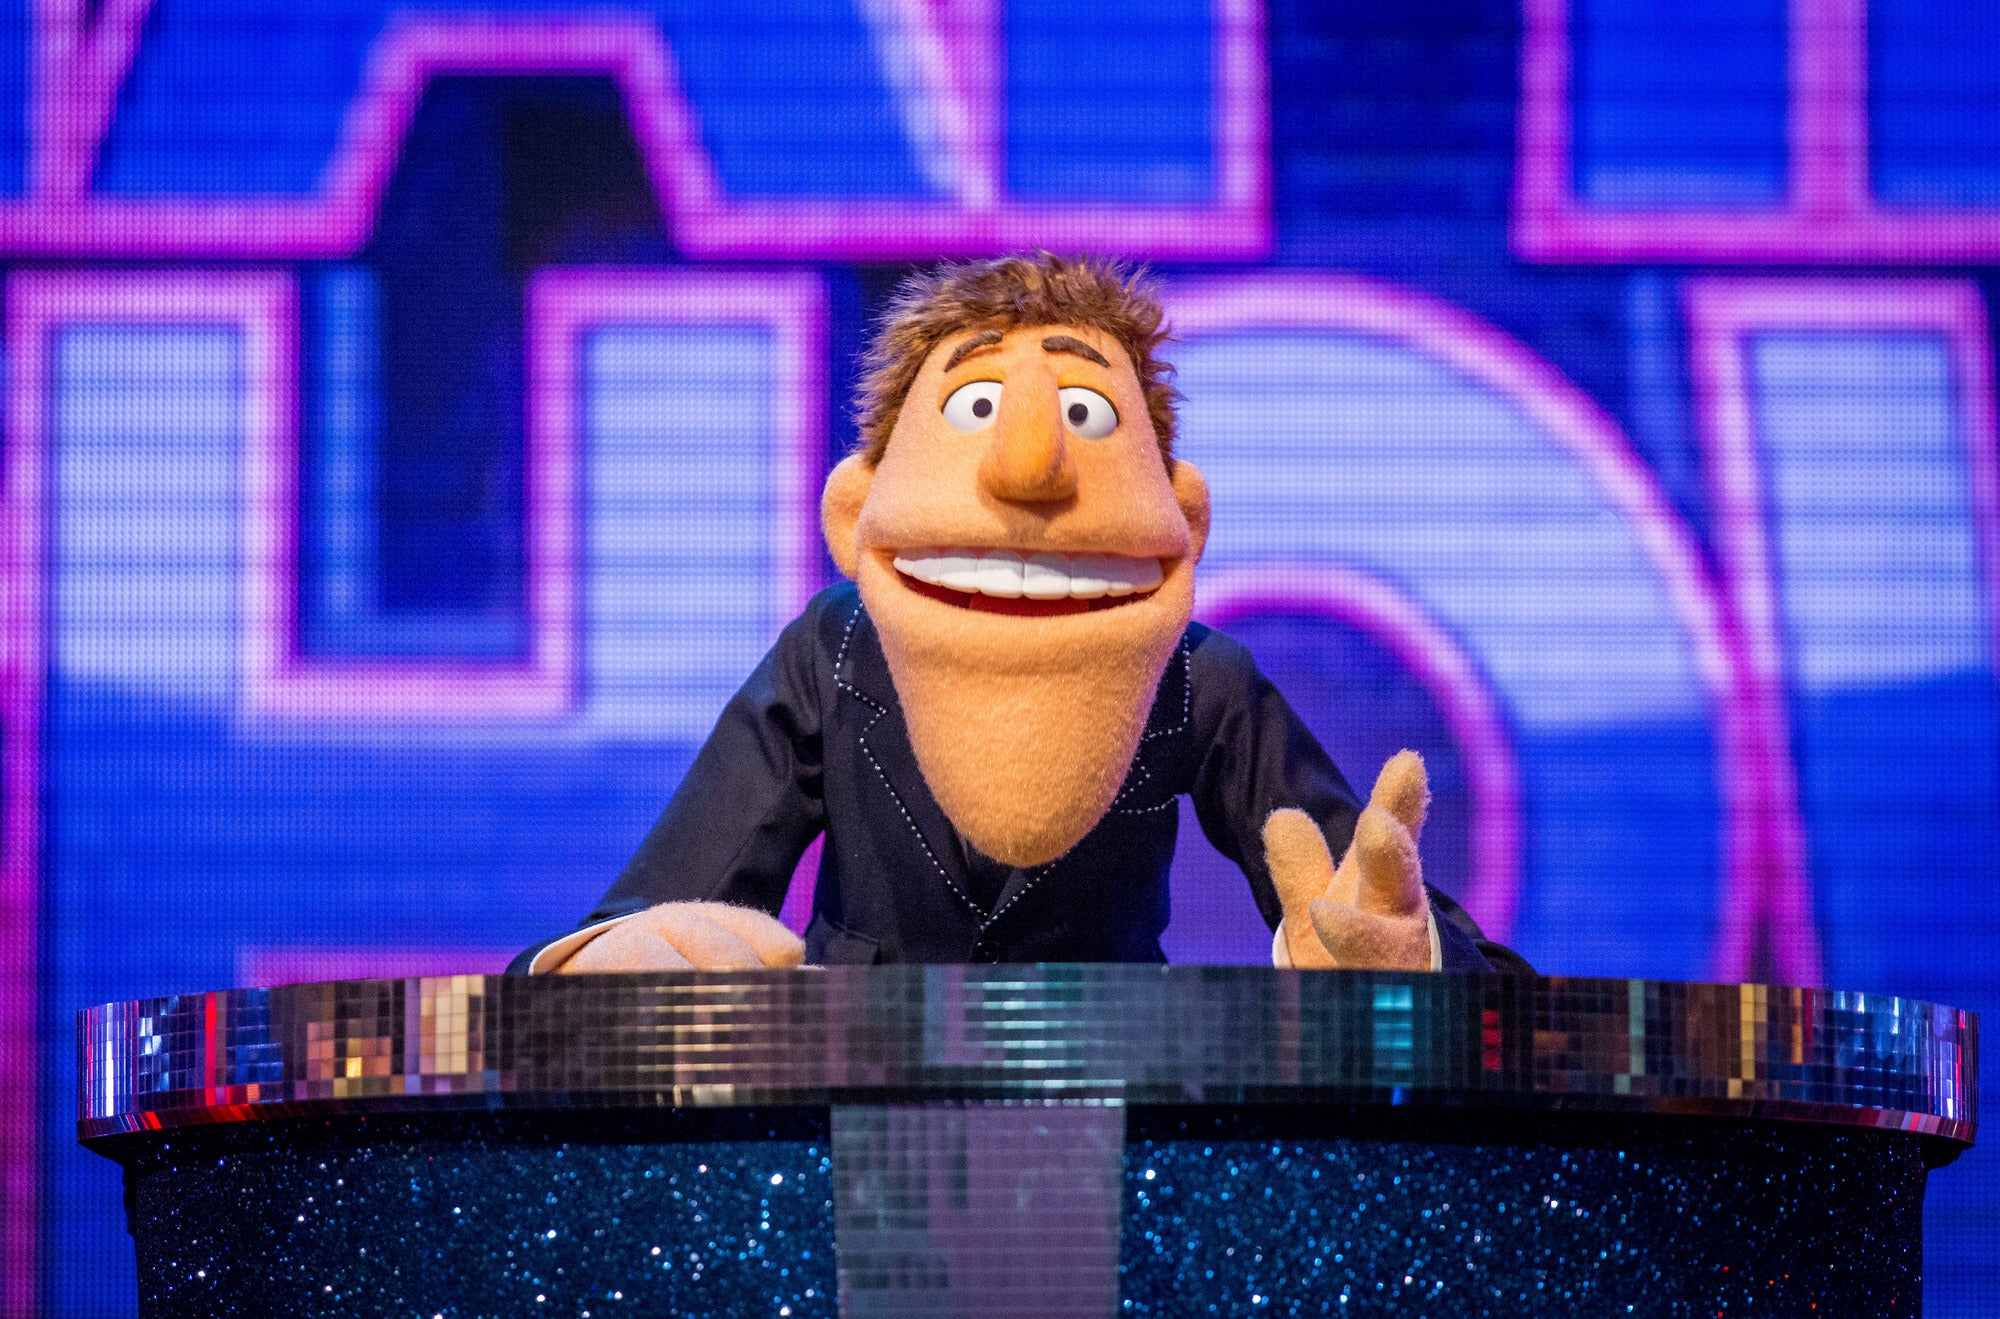 Dougie Colon - Host of That Puppet Game Show